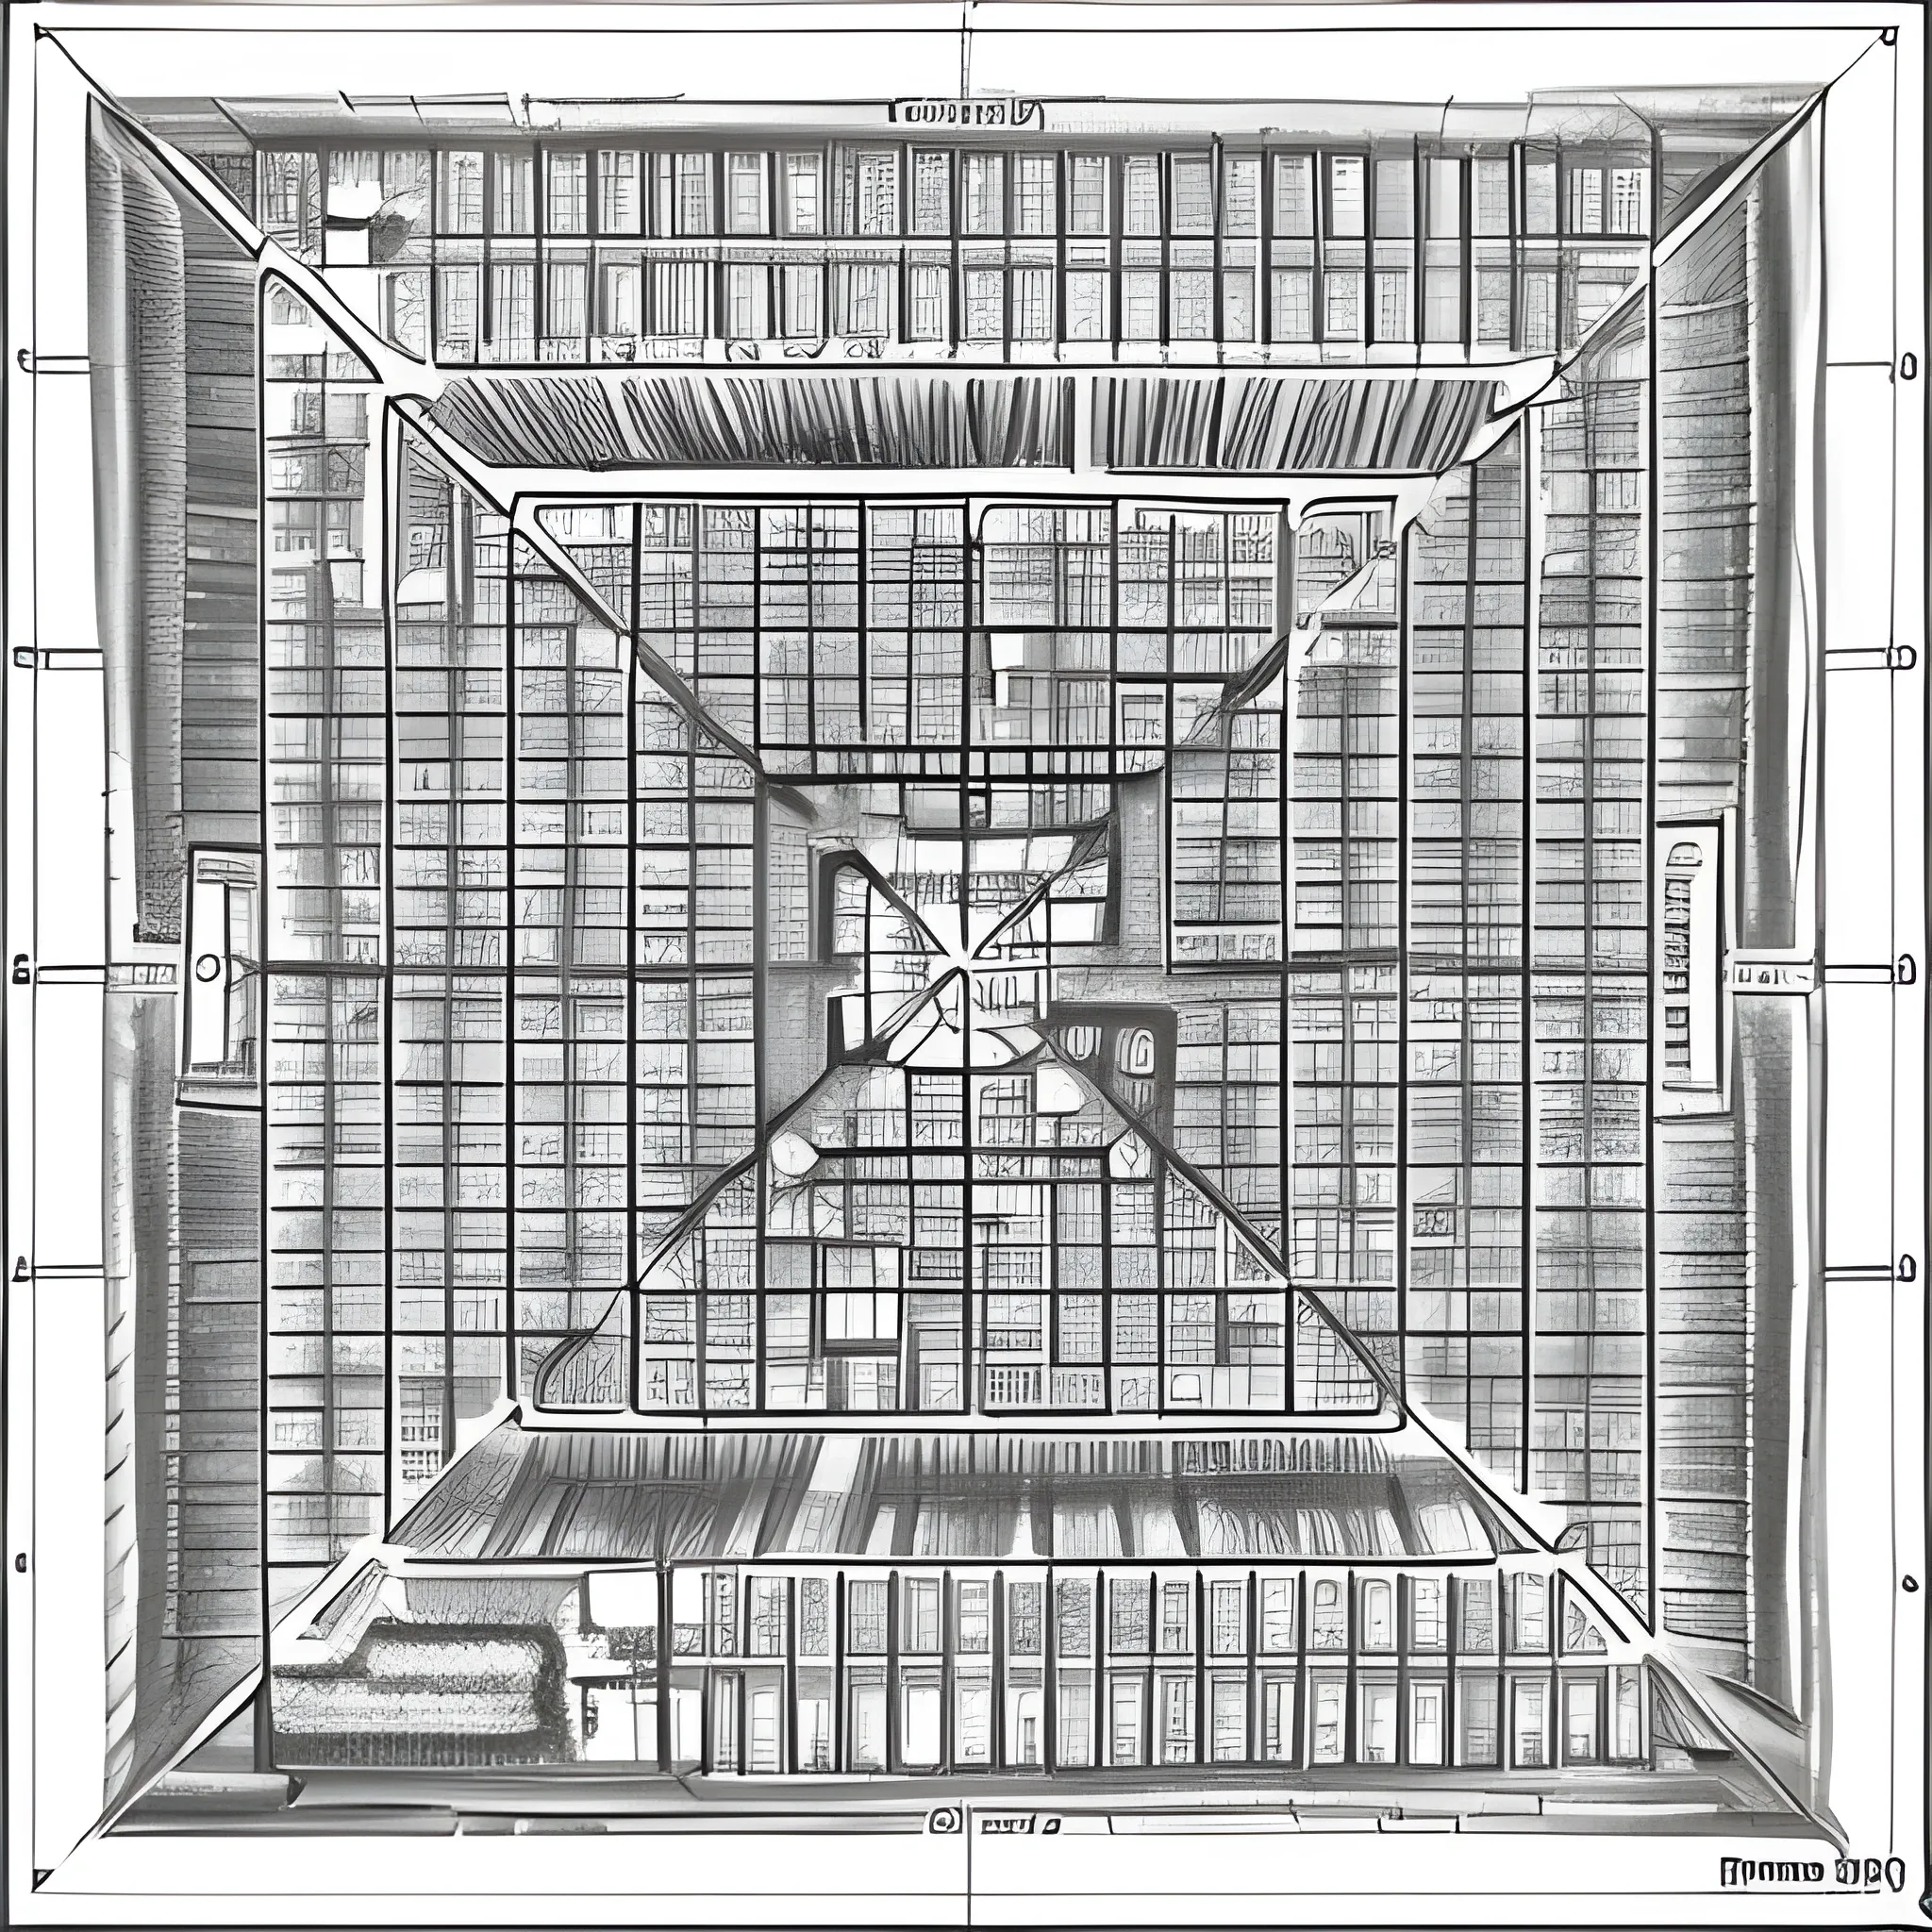 map, simple, black and white, map of a facility with many corridors and rooms, drawn with pencils